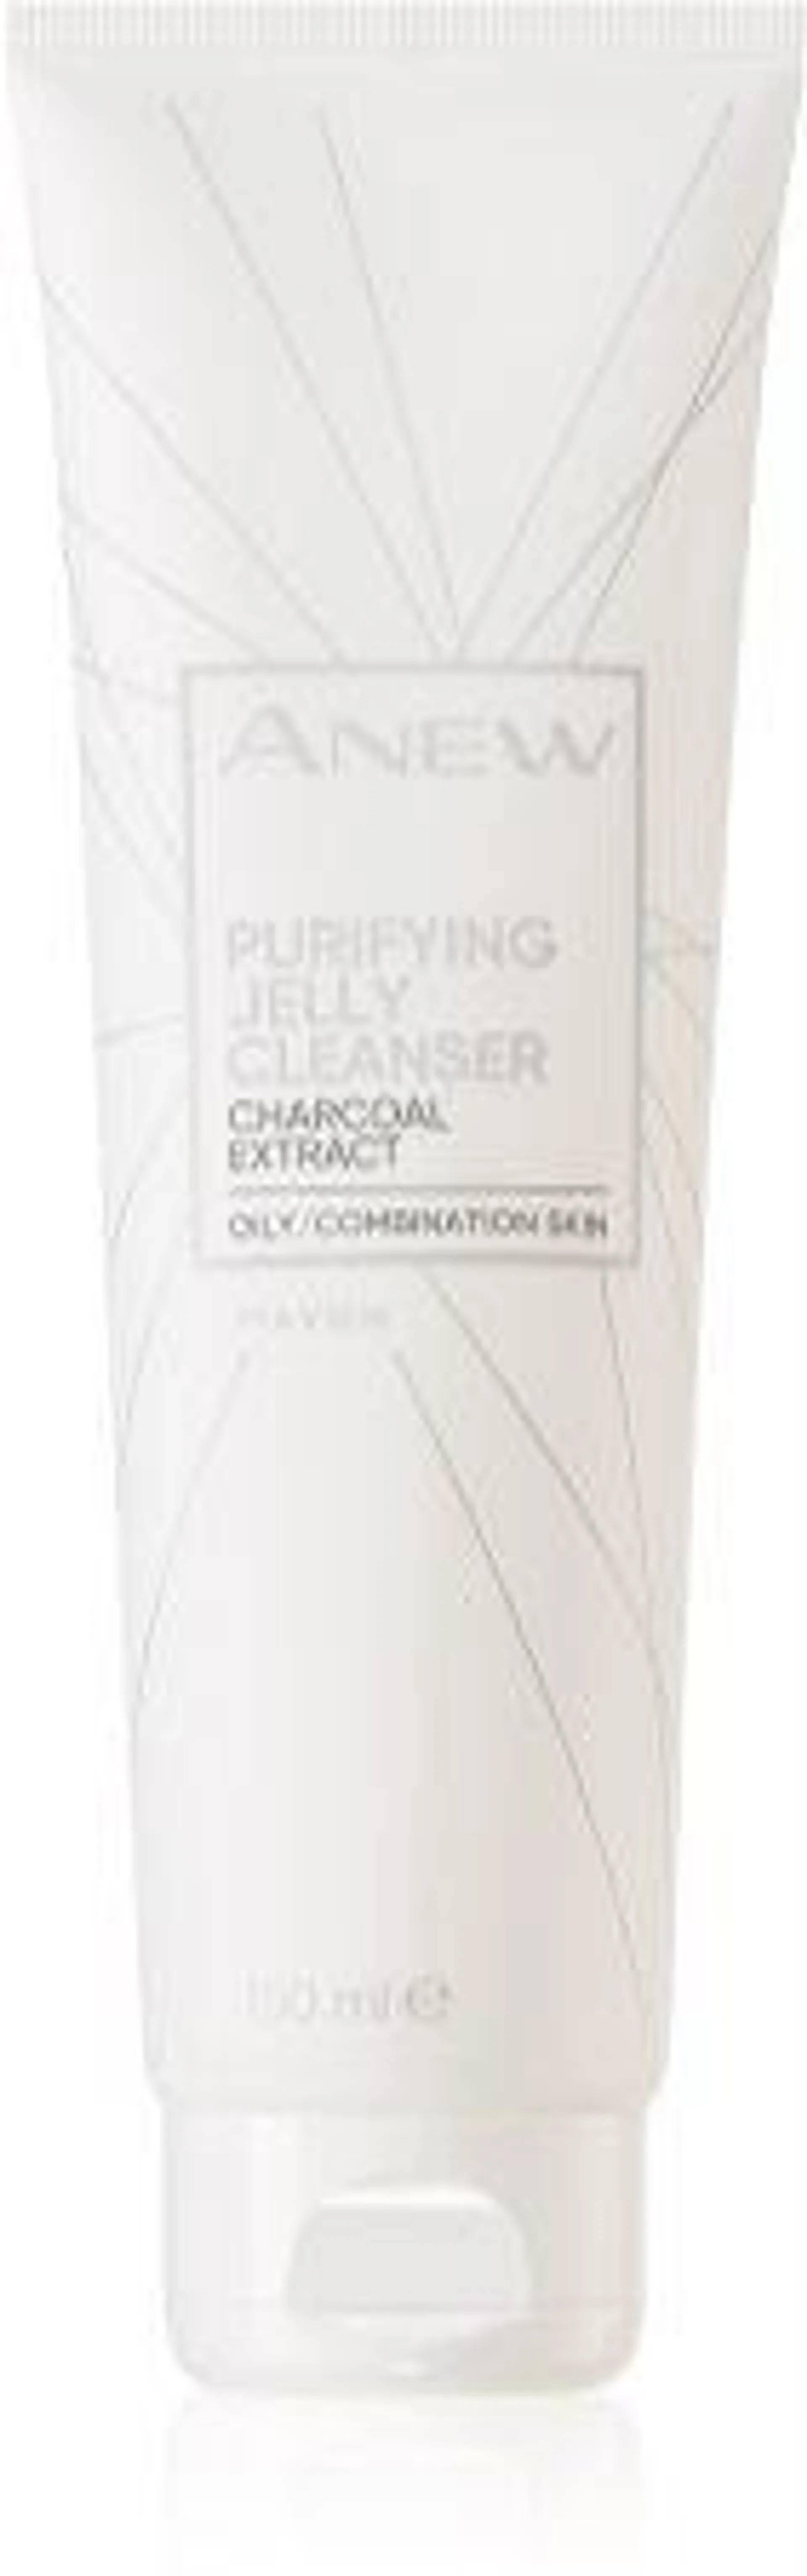 Anew Purifying Jelly Cleanser